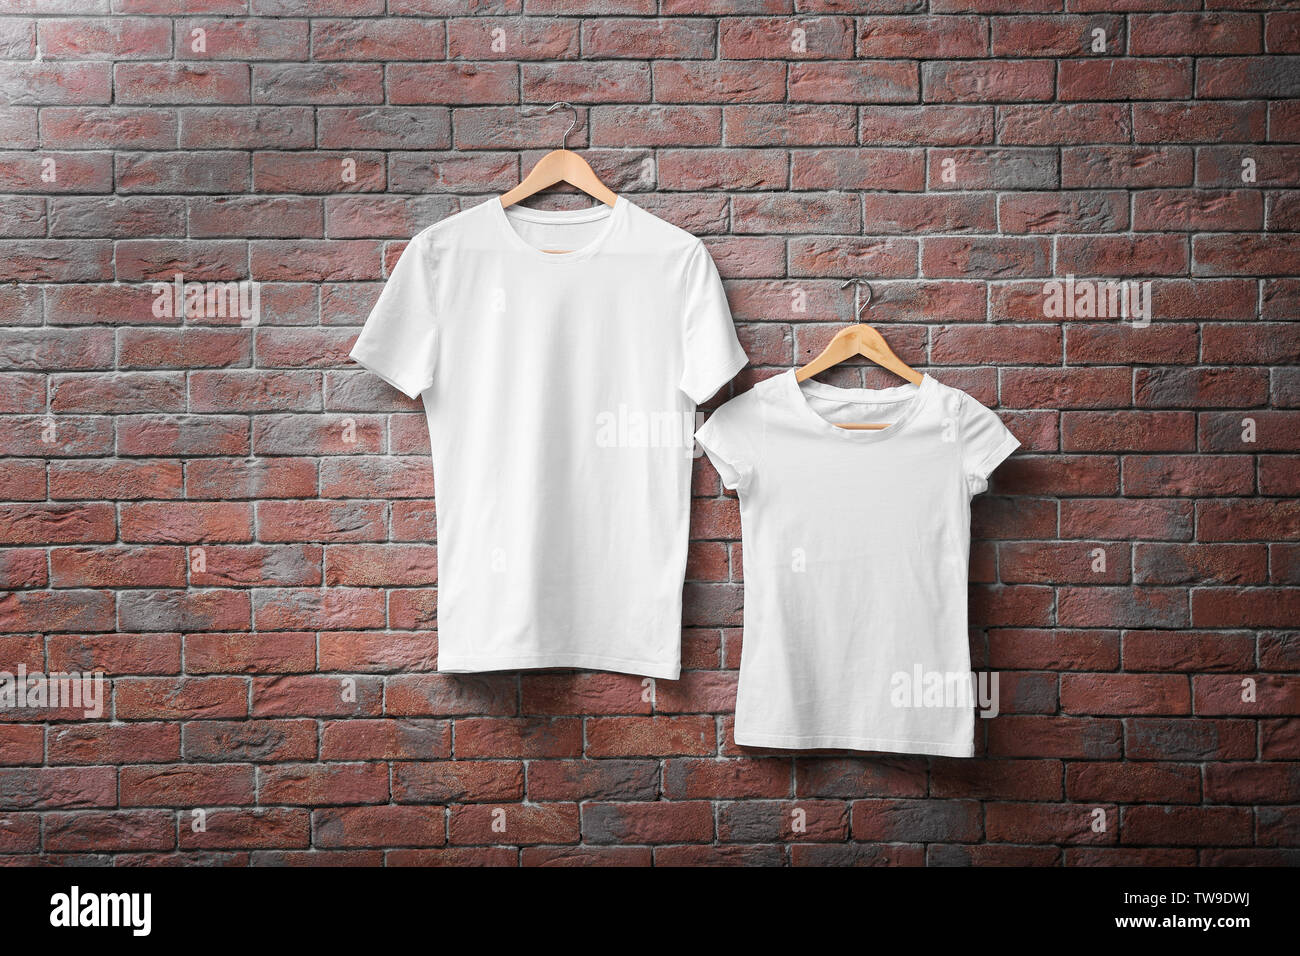 White t-shirts on brick wall background. Mock up for design Stock Photo